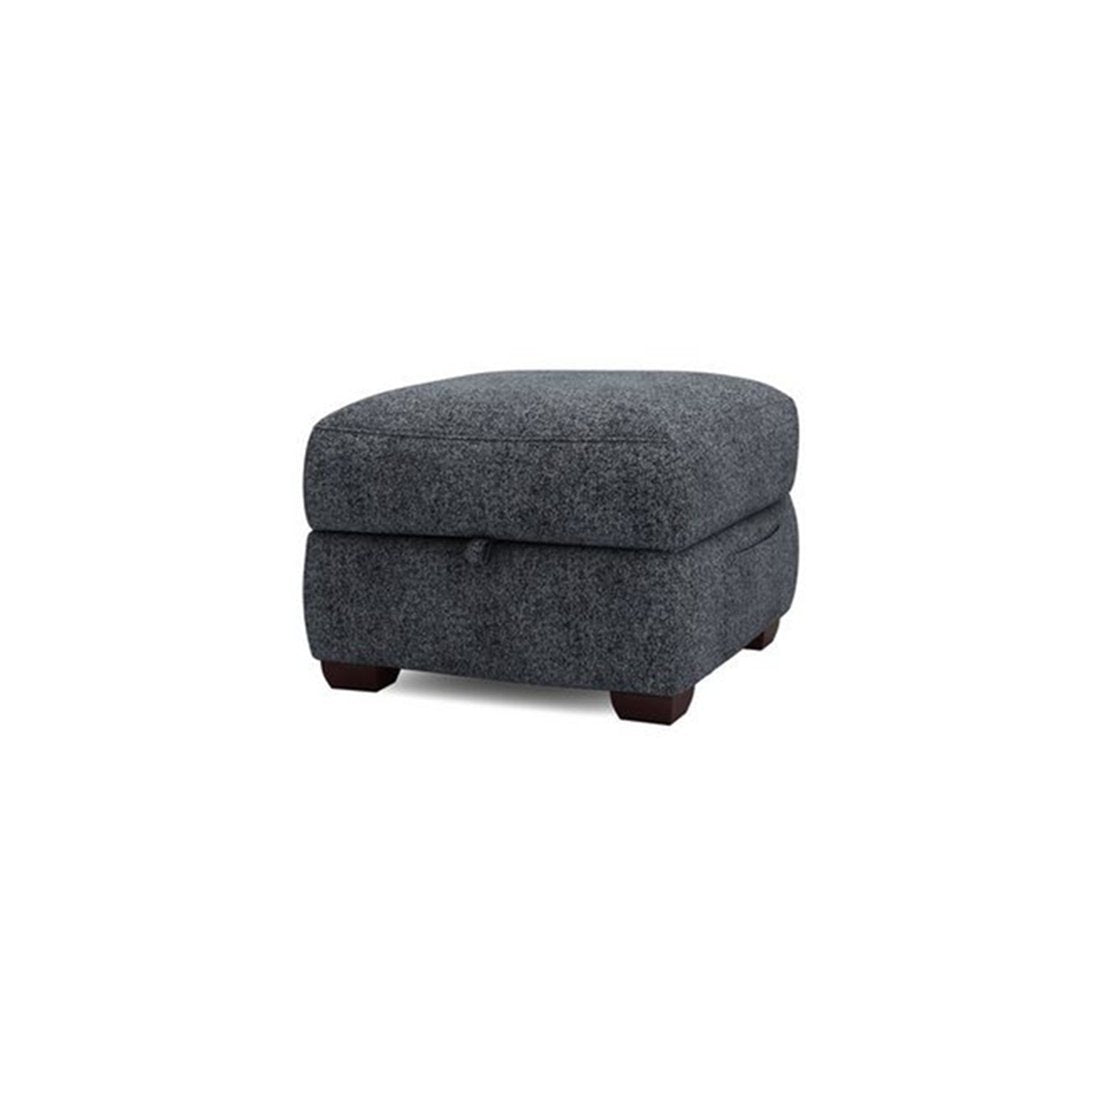 Lancer Square Shape Fabric Ottoman Pouffe Puffy for Foot Rest Home Furniture - Torque India